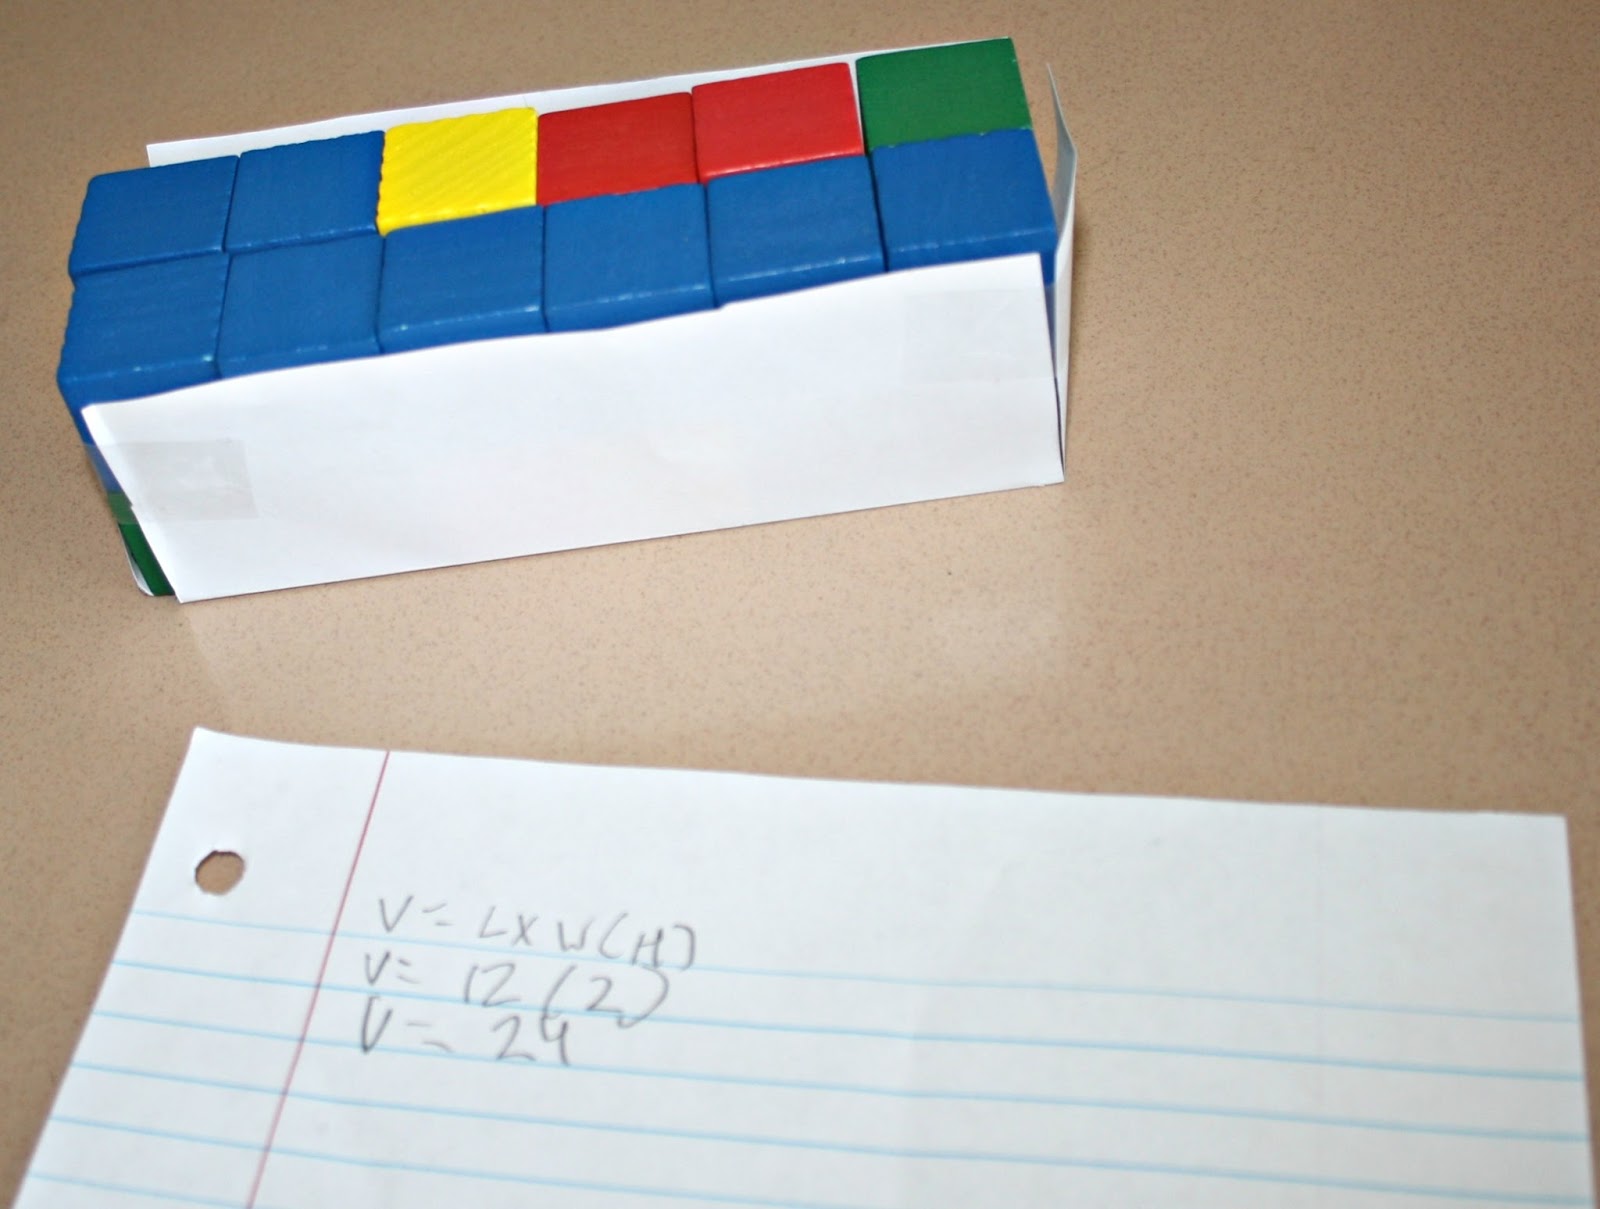 Students love a hands on learning activity! This simple FREE printable will get your students up and their brains moving while coming up with their formula to calculate the volume of the shape they created. Then having the students create their own shape, and the rest of the class must find the volume, creates a bunch of AH HA moments! Be sure to grab this freebie!{freebie, geometry, math activities, upper elementary}